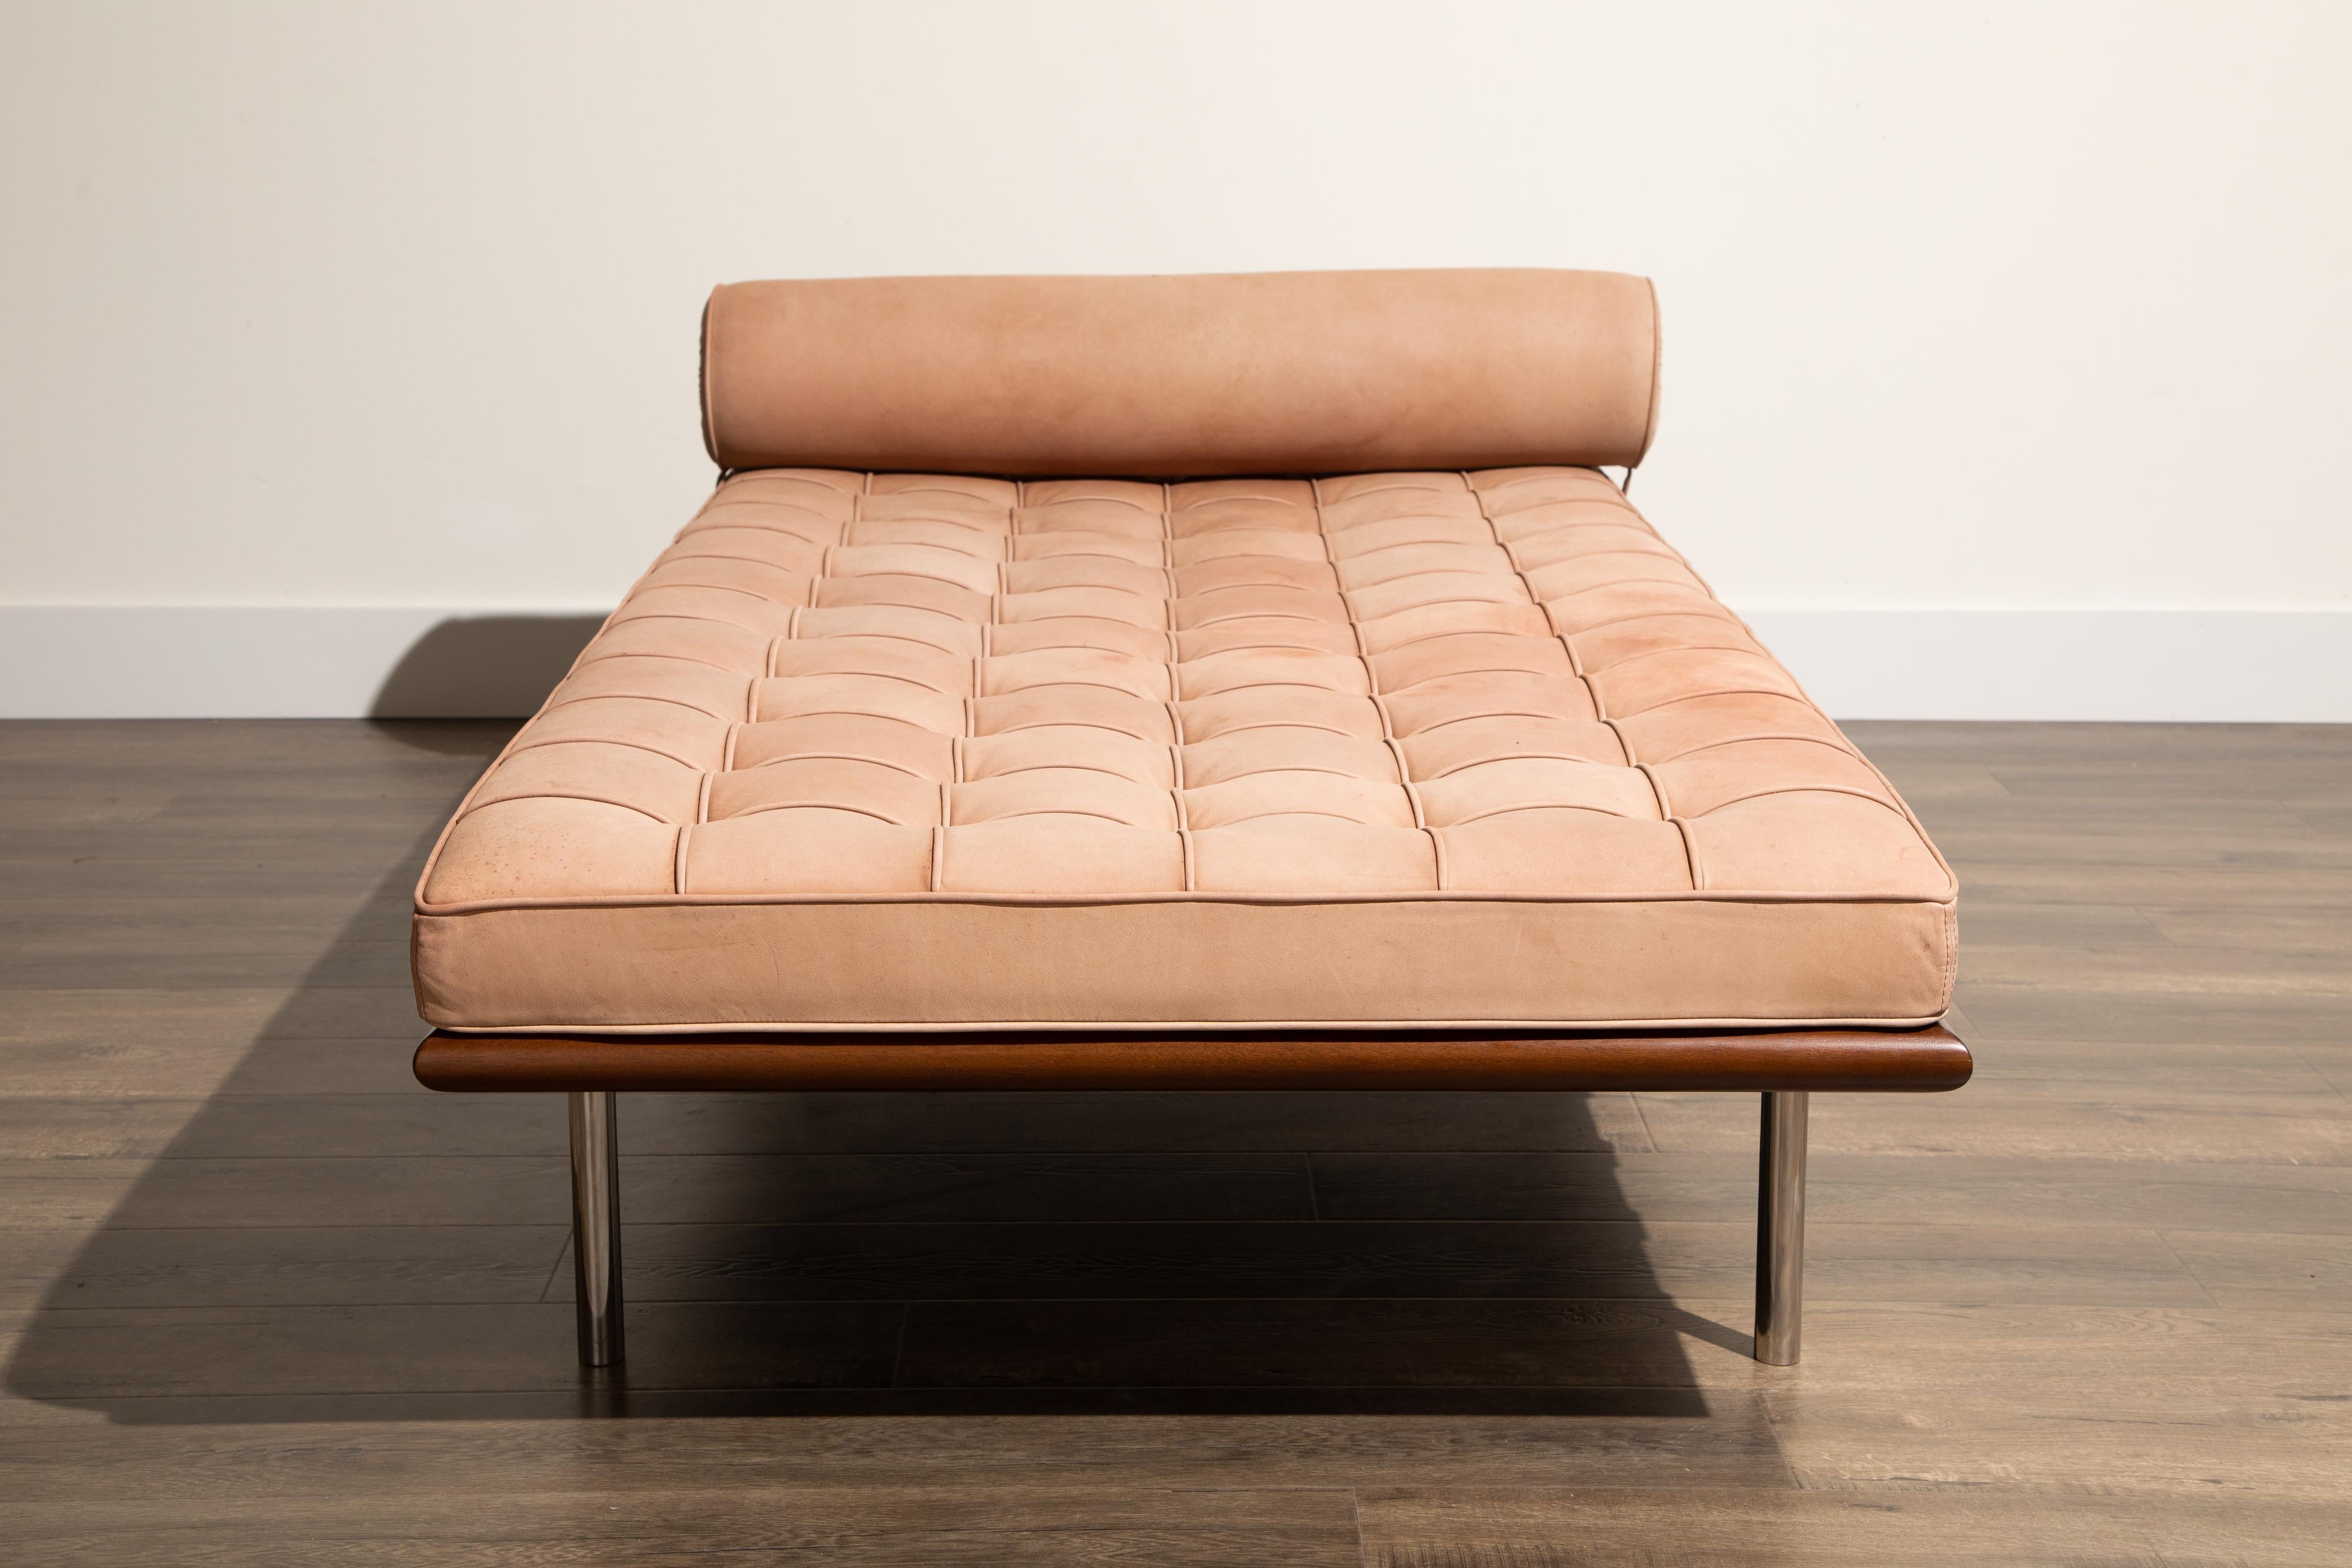 Mid-Century Modern Barcelona Daybed in Nude Suede by Ludwig Mies van der Rohe for Knoll, Signed 